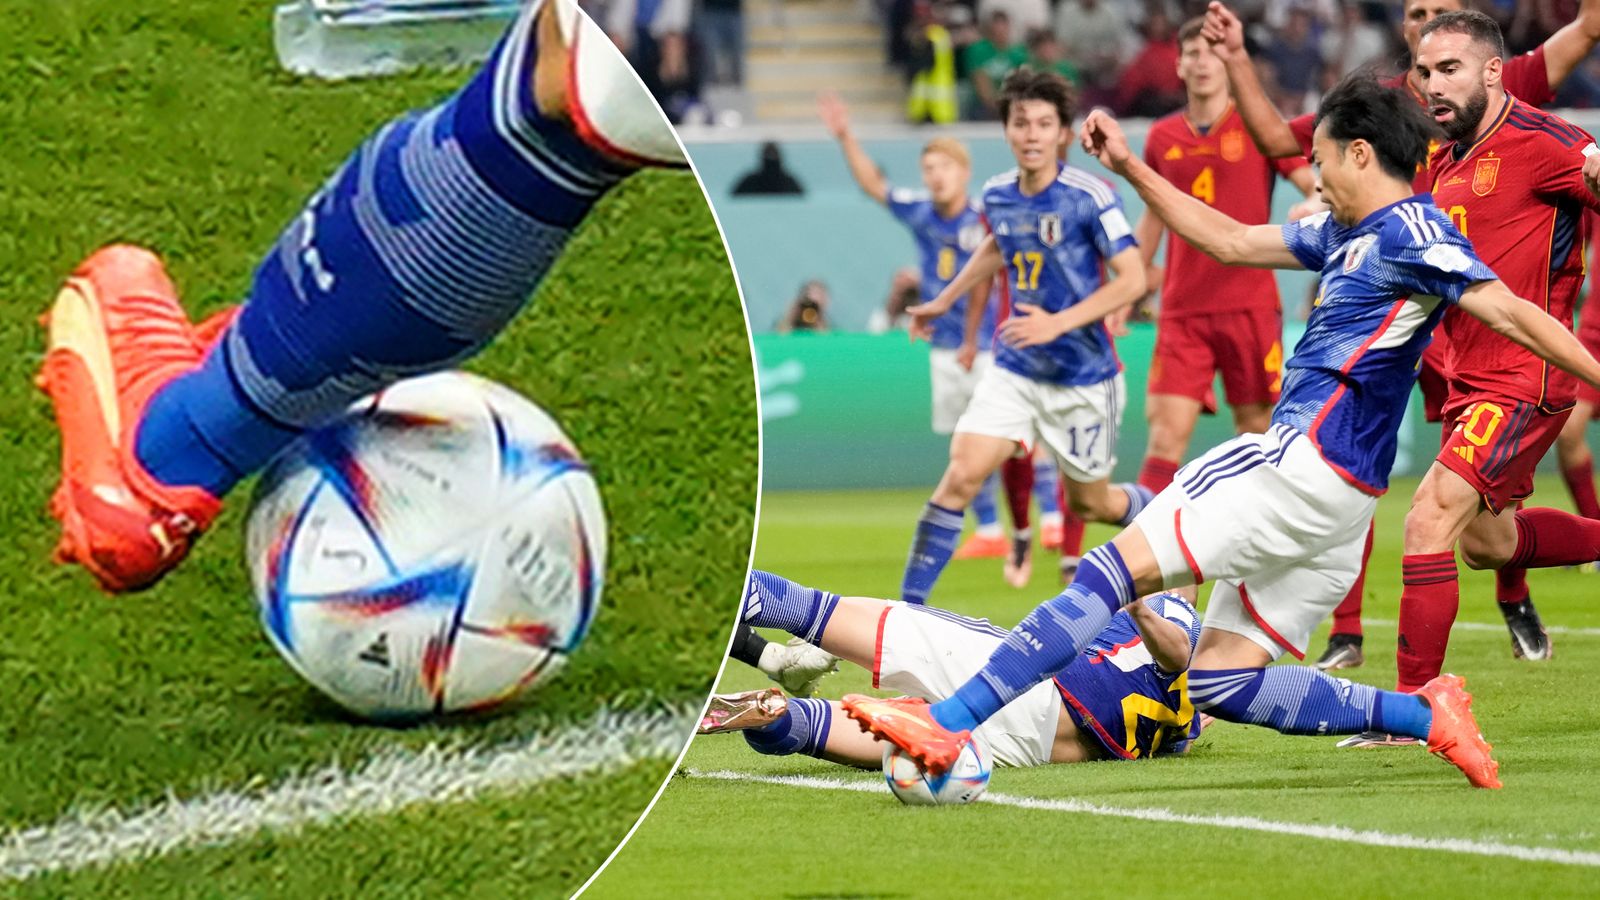 graeme-souness-questions-var-decision-and-calls-for-proof-from-fifa-over-dramatic-japan-goal-against-spain-which-knocked-out-germany